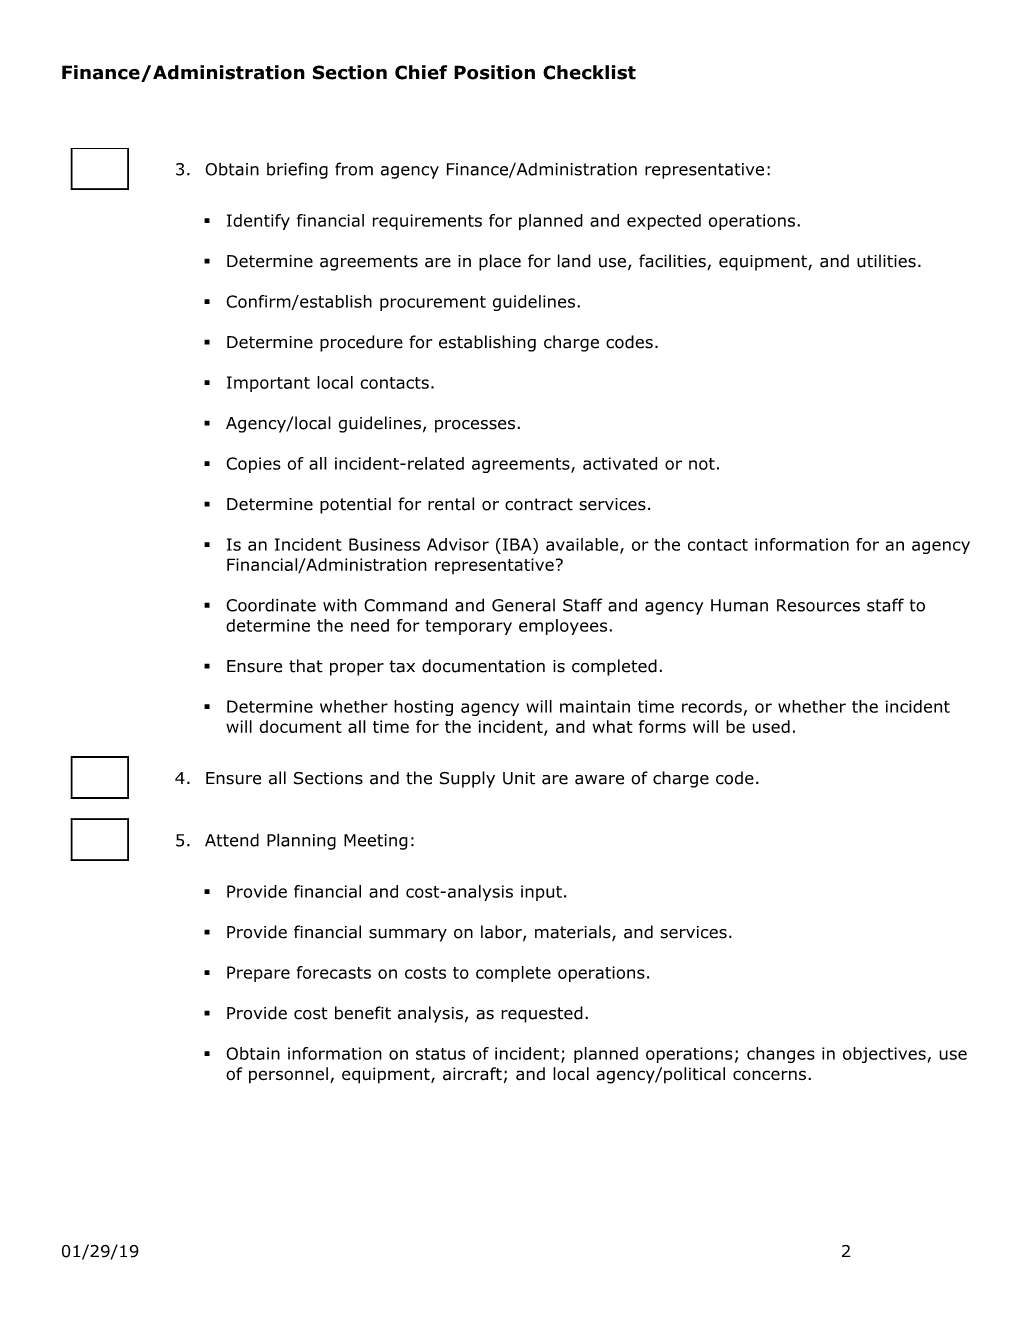 Finance/Administration Section Chief Position Checklist